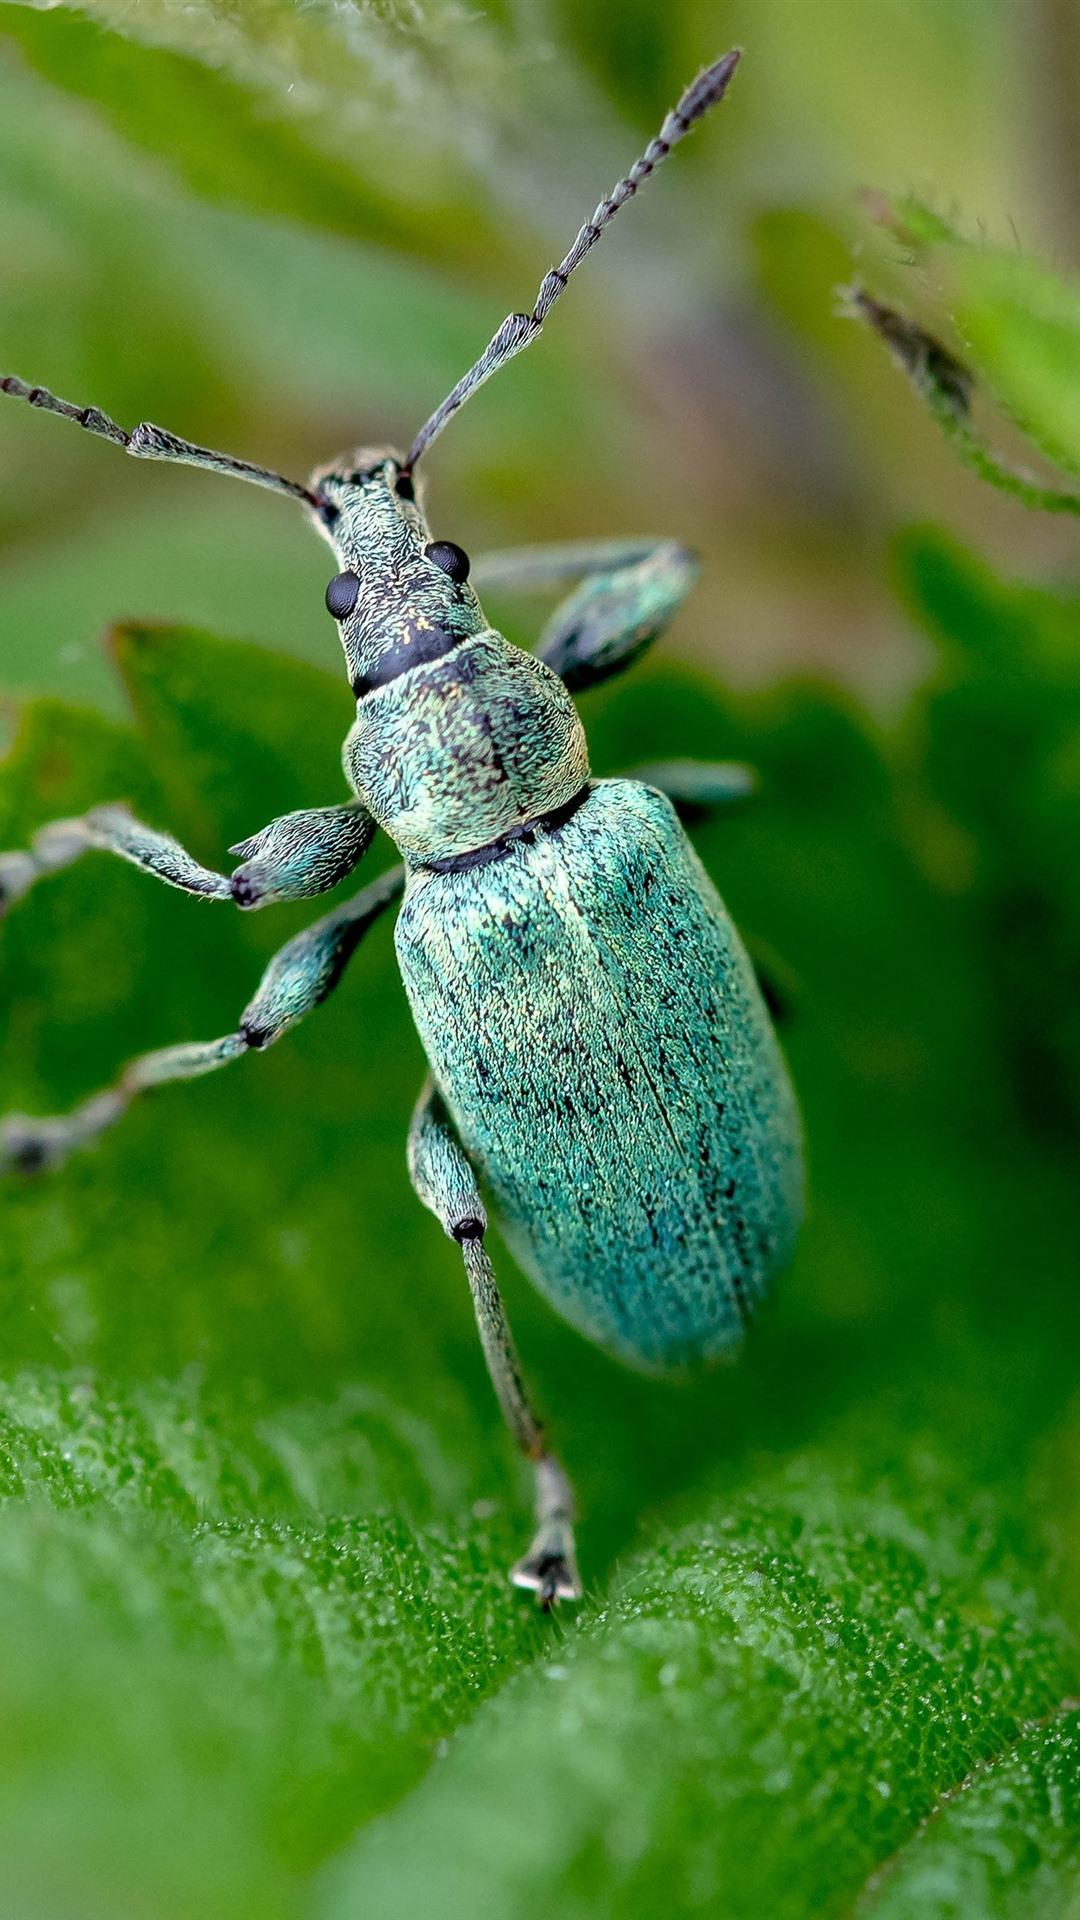 Beetle Insect High Resolution Desktop Wallpaper, Beetle Insect, Animal